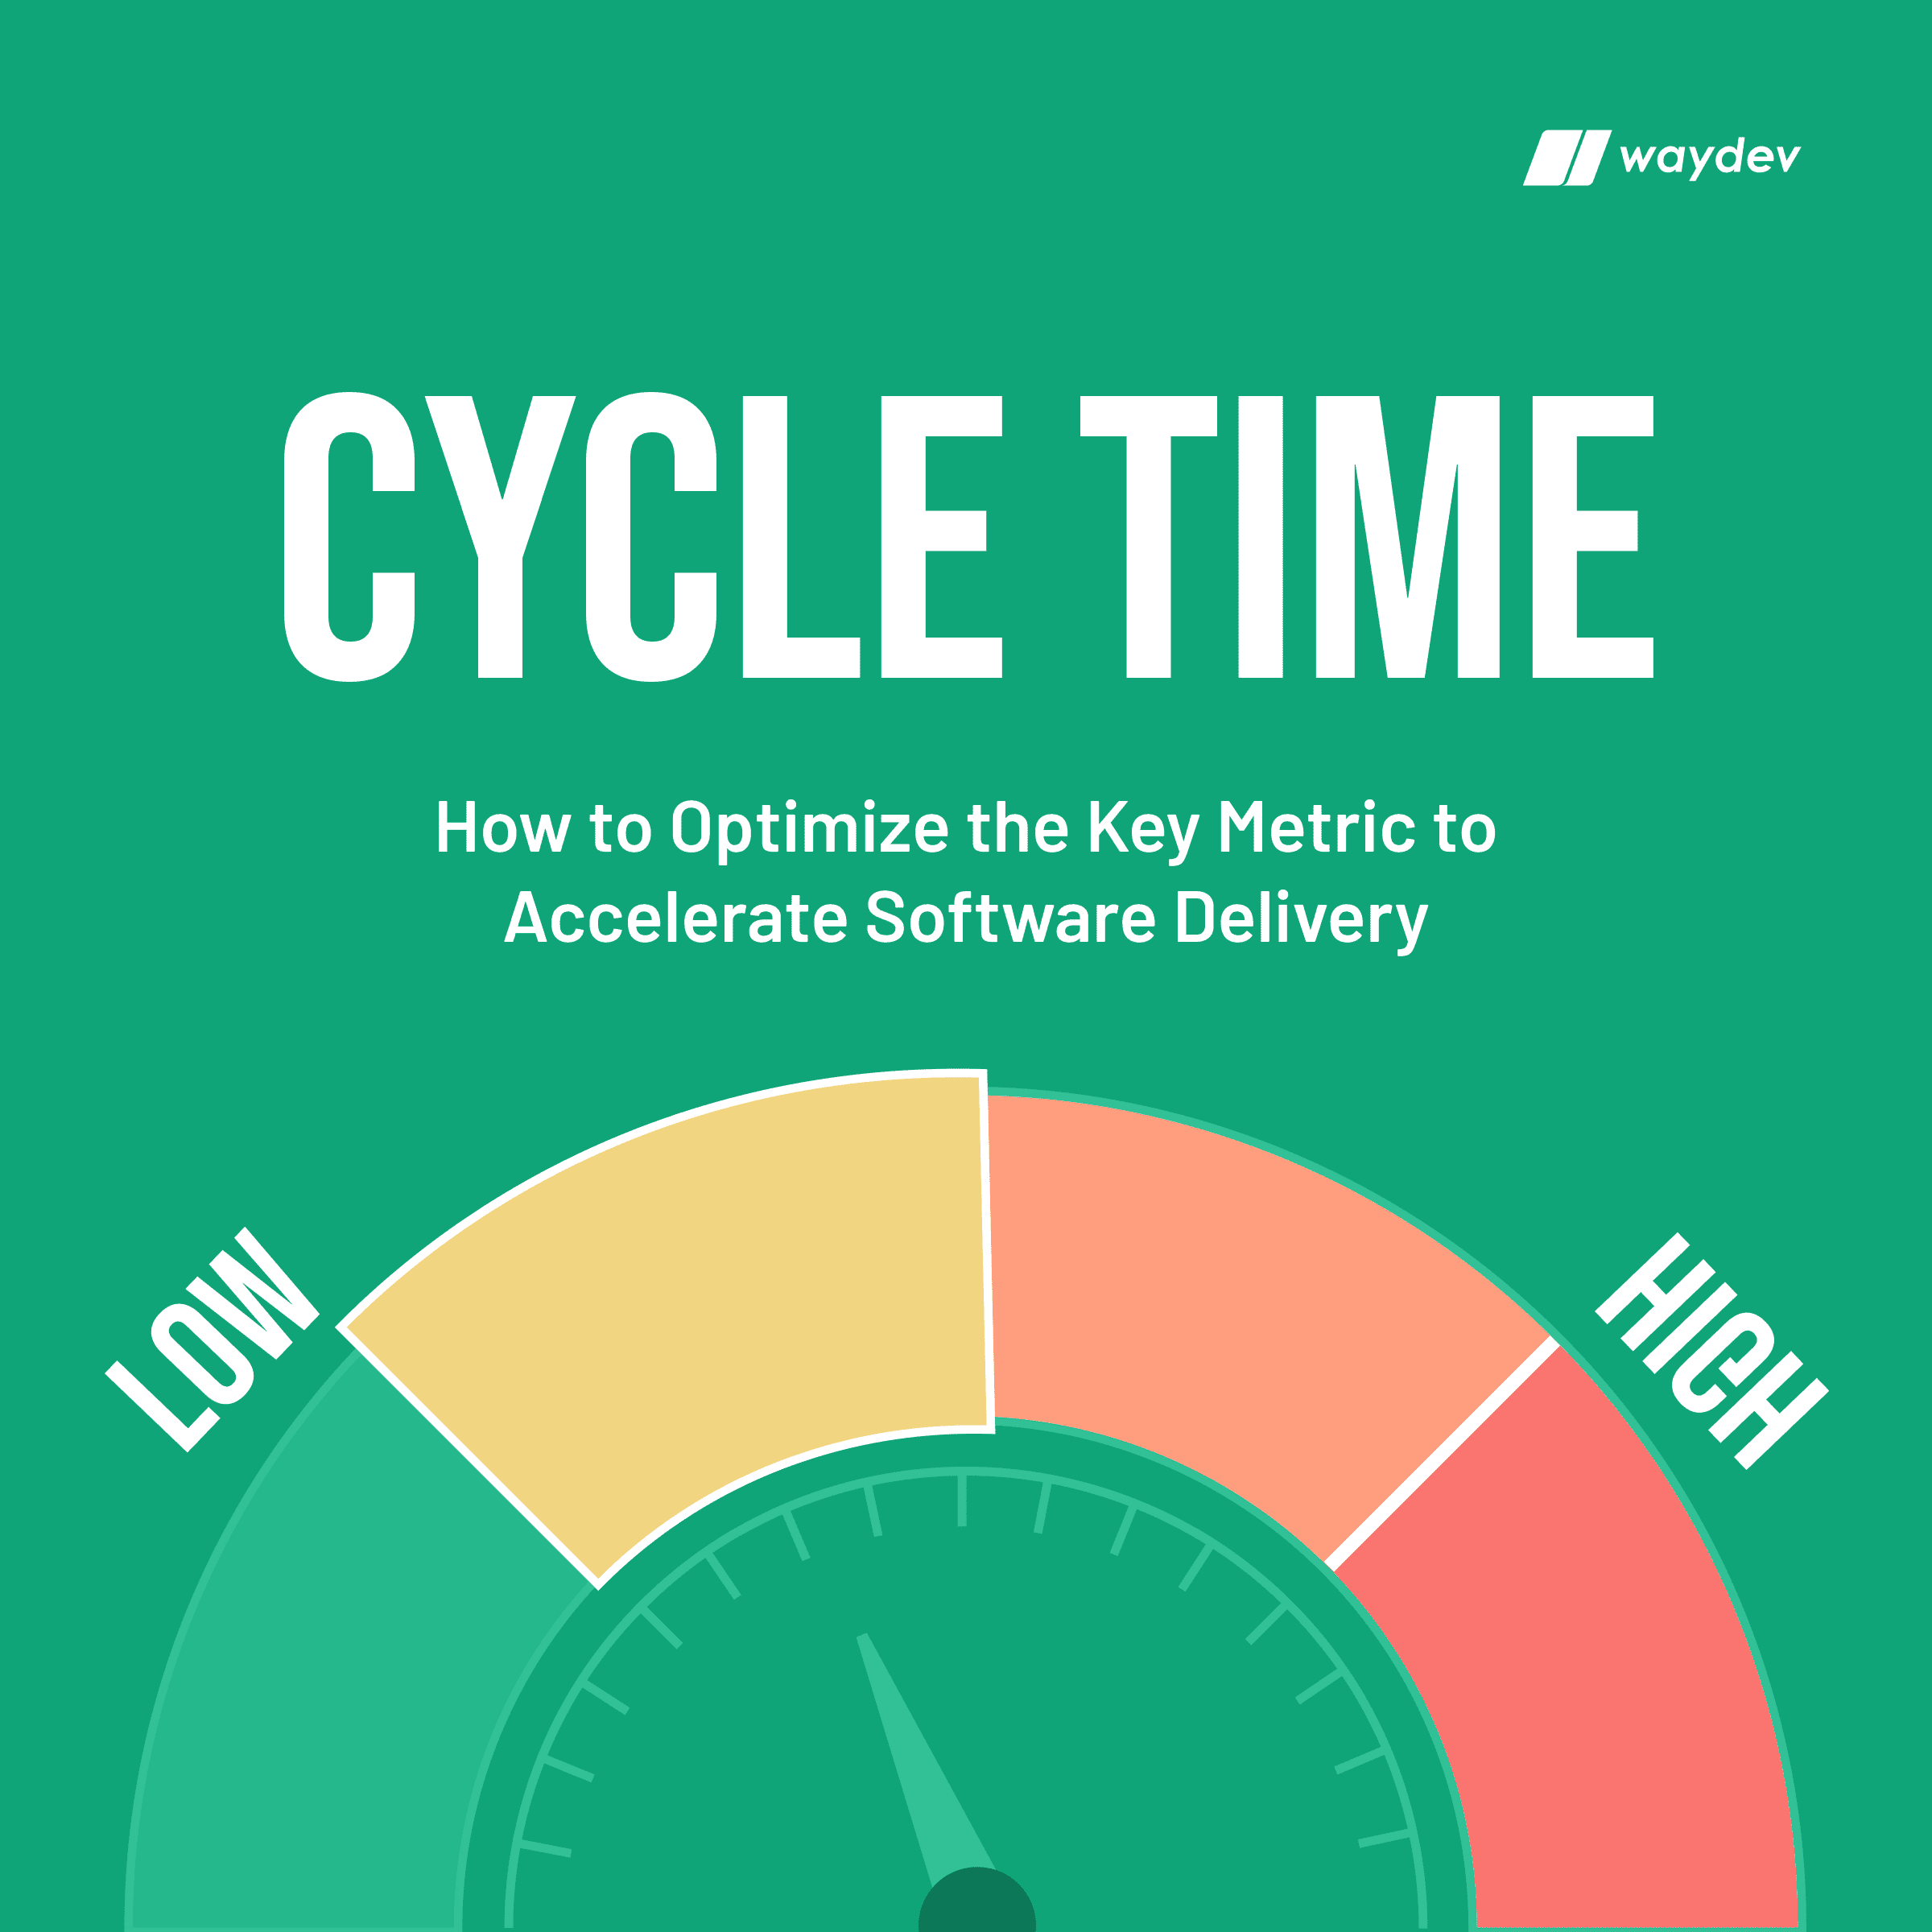 Cycle Time: How to Optimize the Key Metric to Accelerate Software Delivery